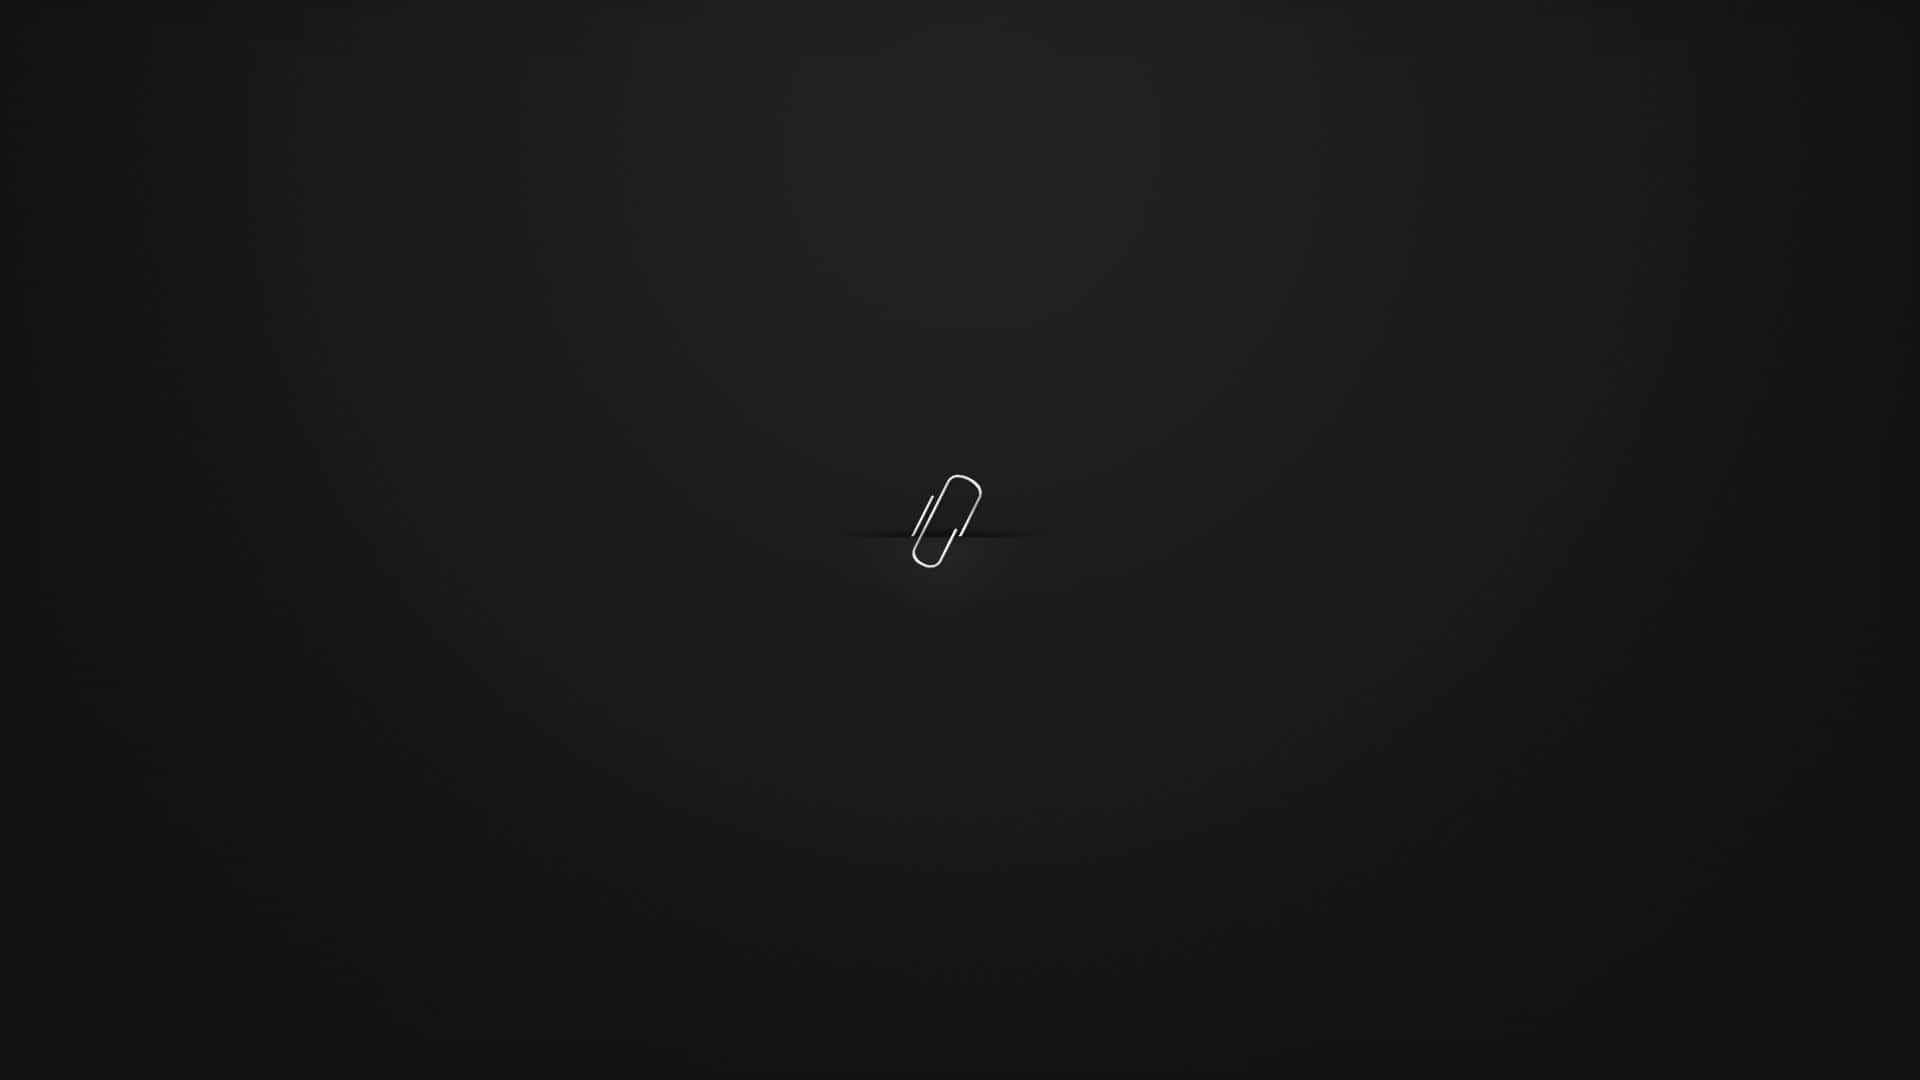 A Black Background With A White Paper Clip